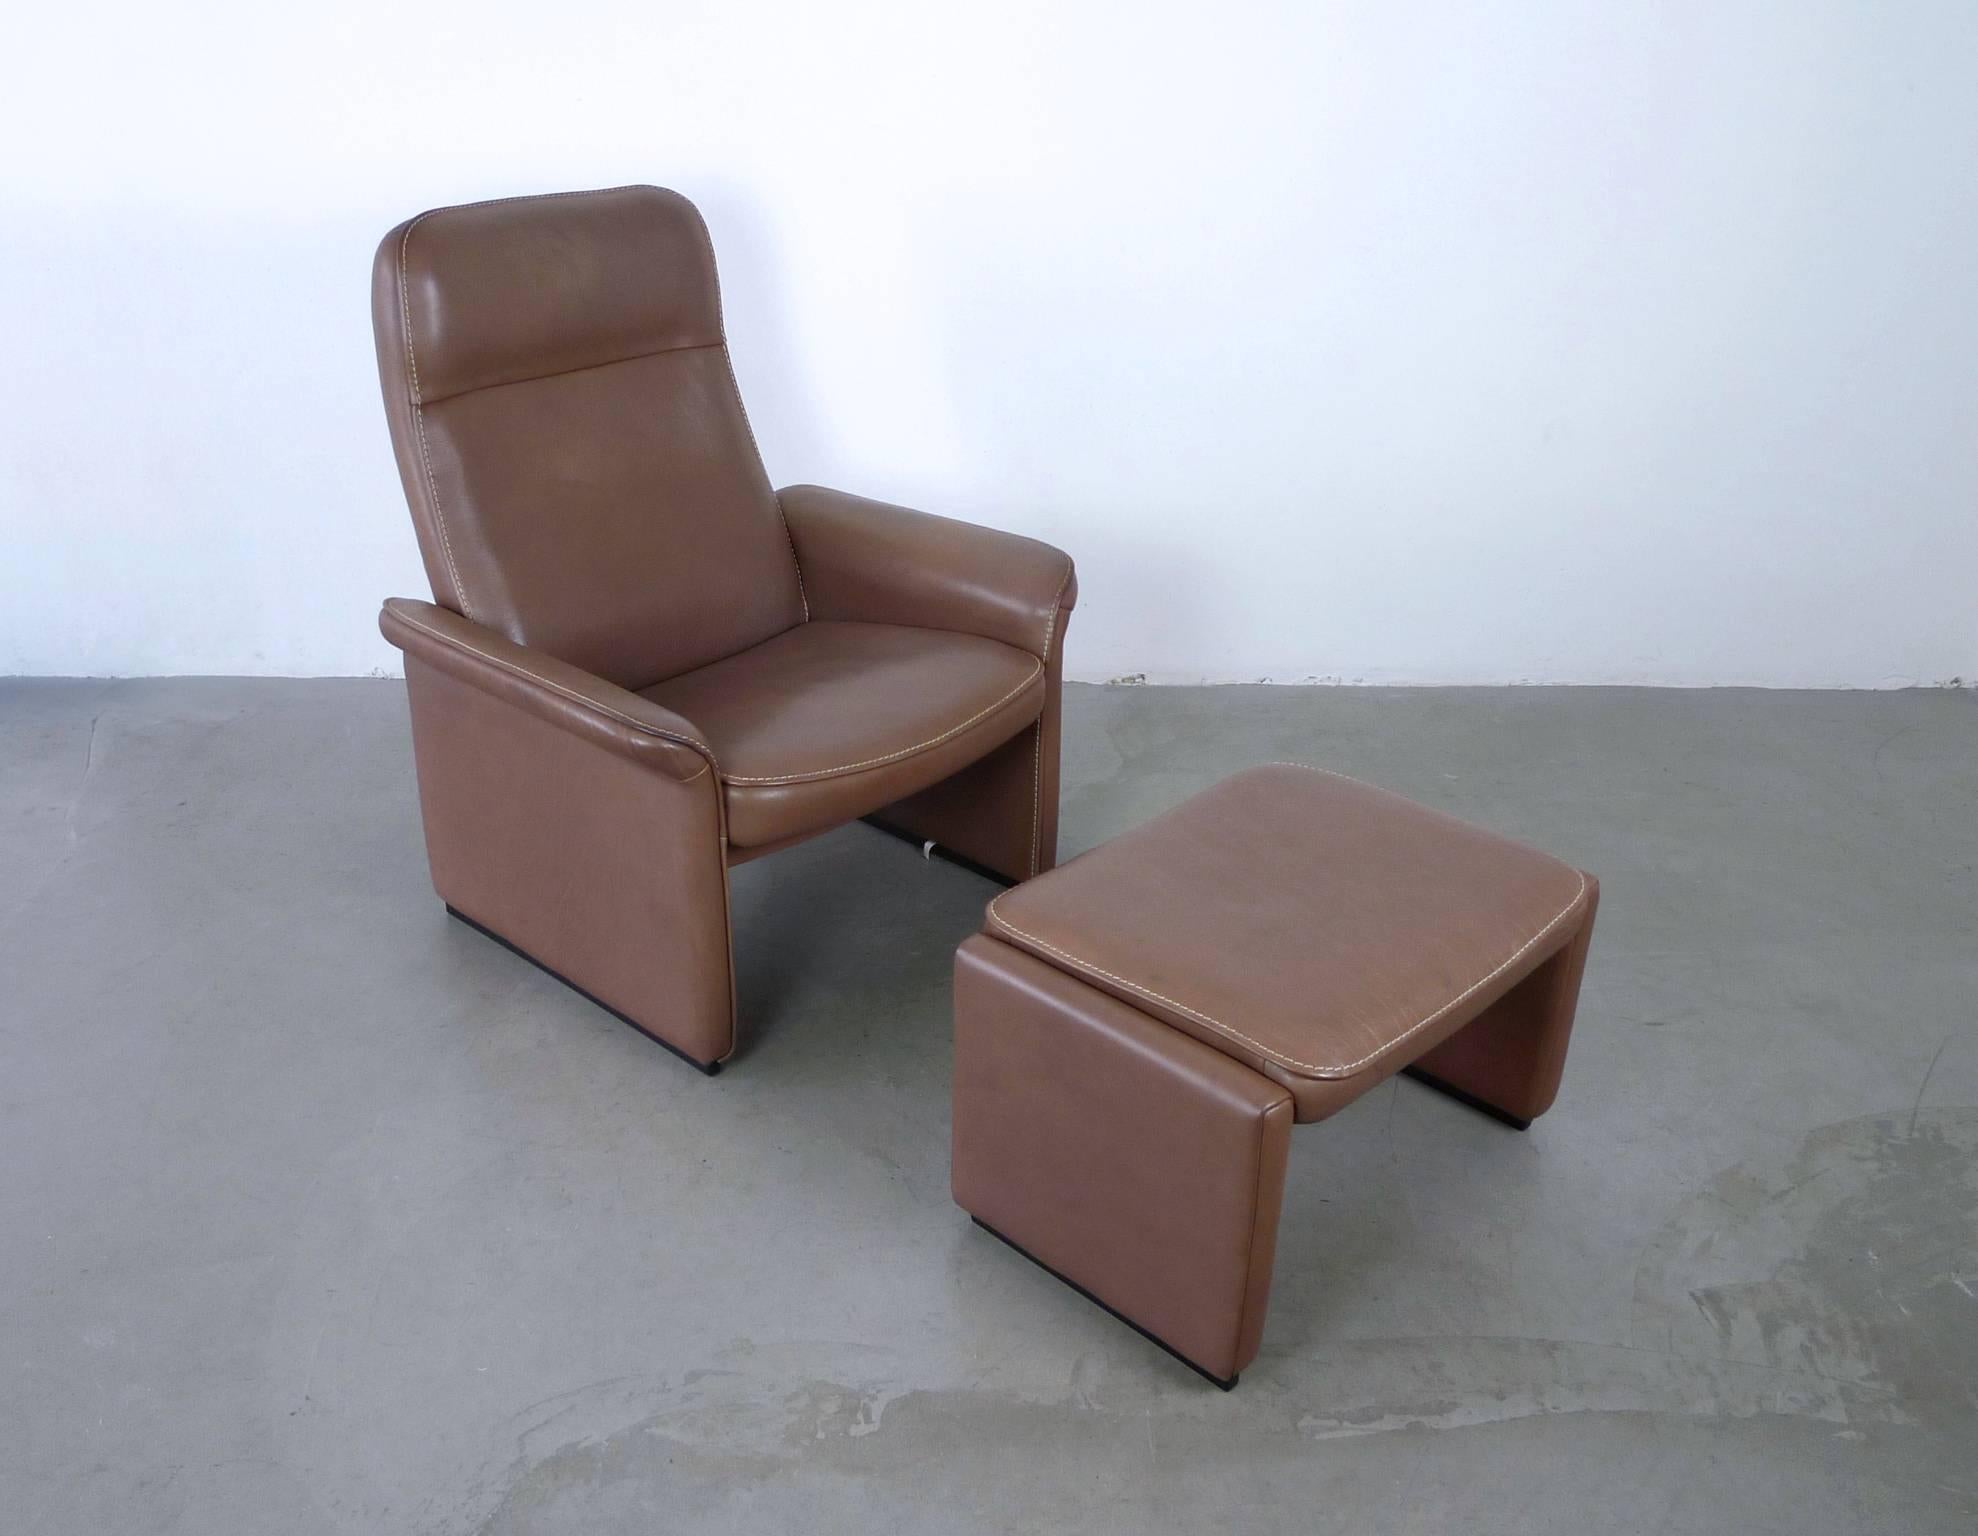 Model DS 50 lounge chair with matching ottoman from the Swiss manufacturer De Sede.
Chair and ottoman are upholstered in thick bright brown buffalo neck leather with black lacquered wood skids at the bottom.
The inclination angle of the backrest